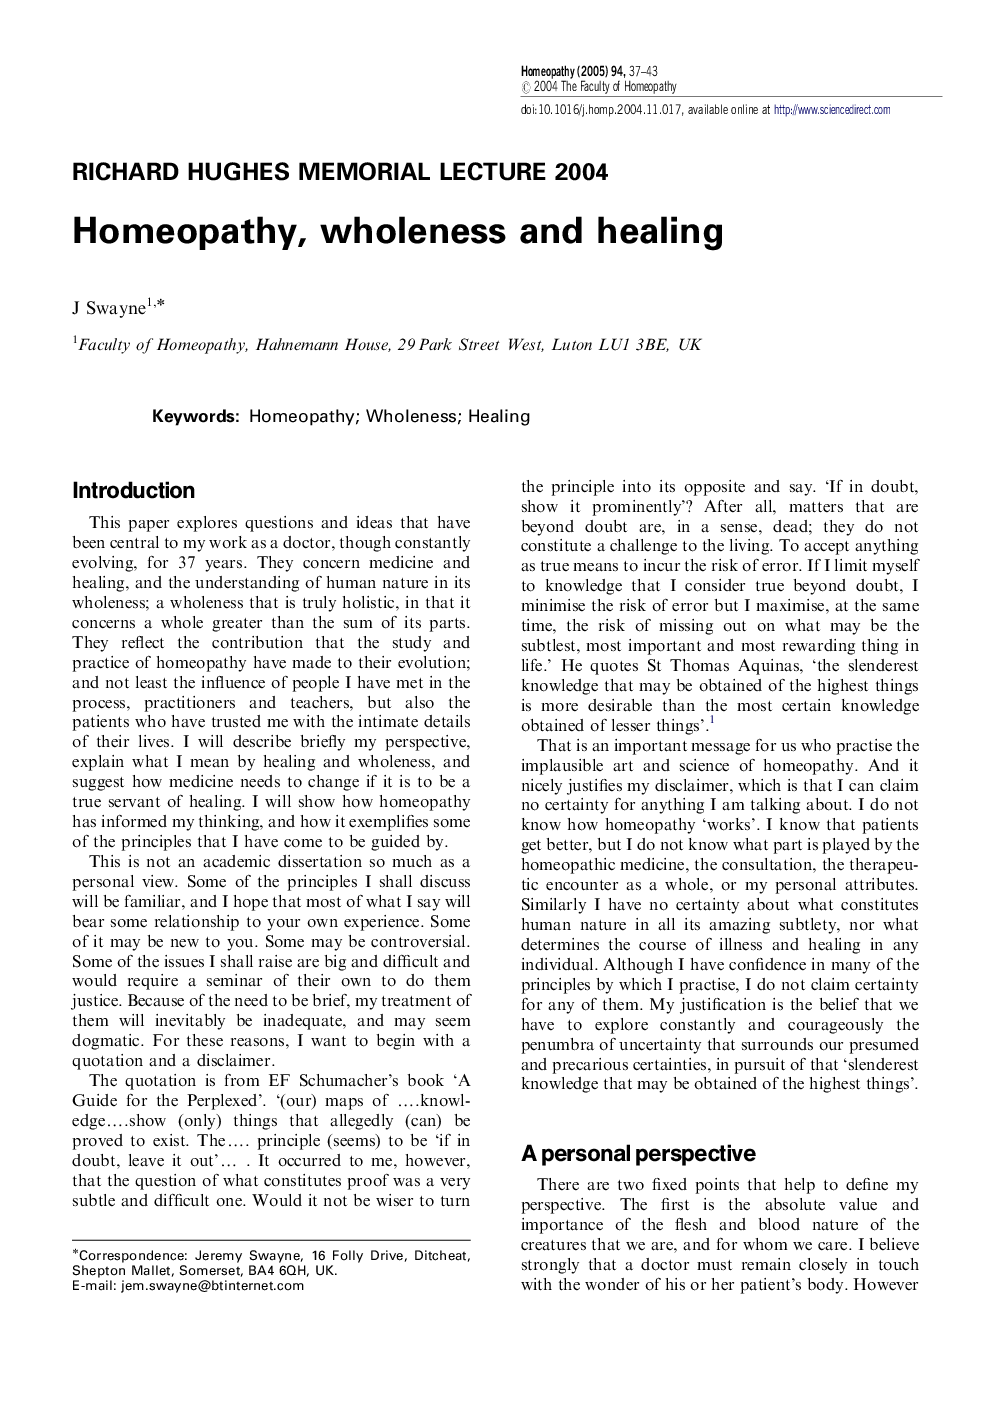 Homeopathy, wholeness and healing